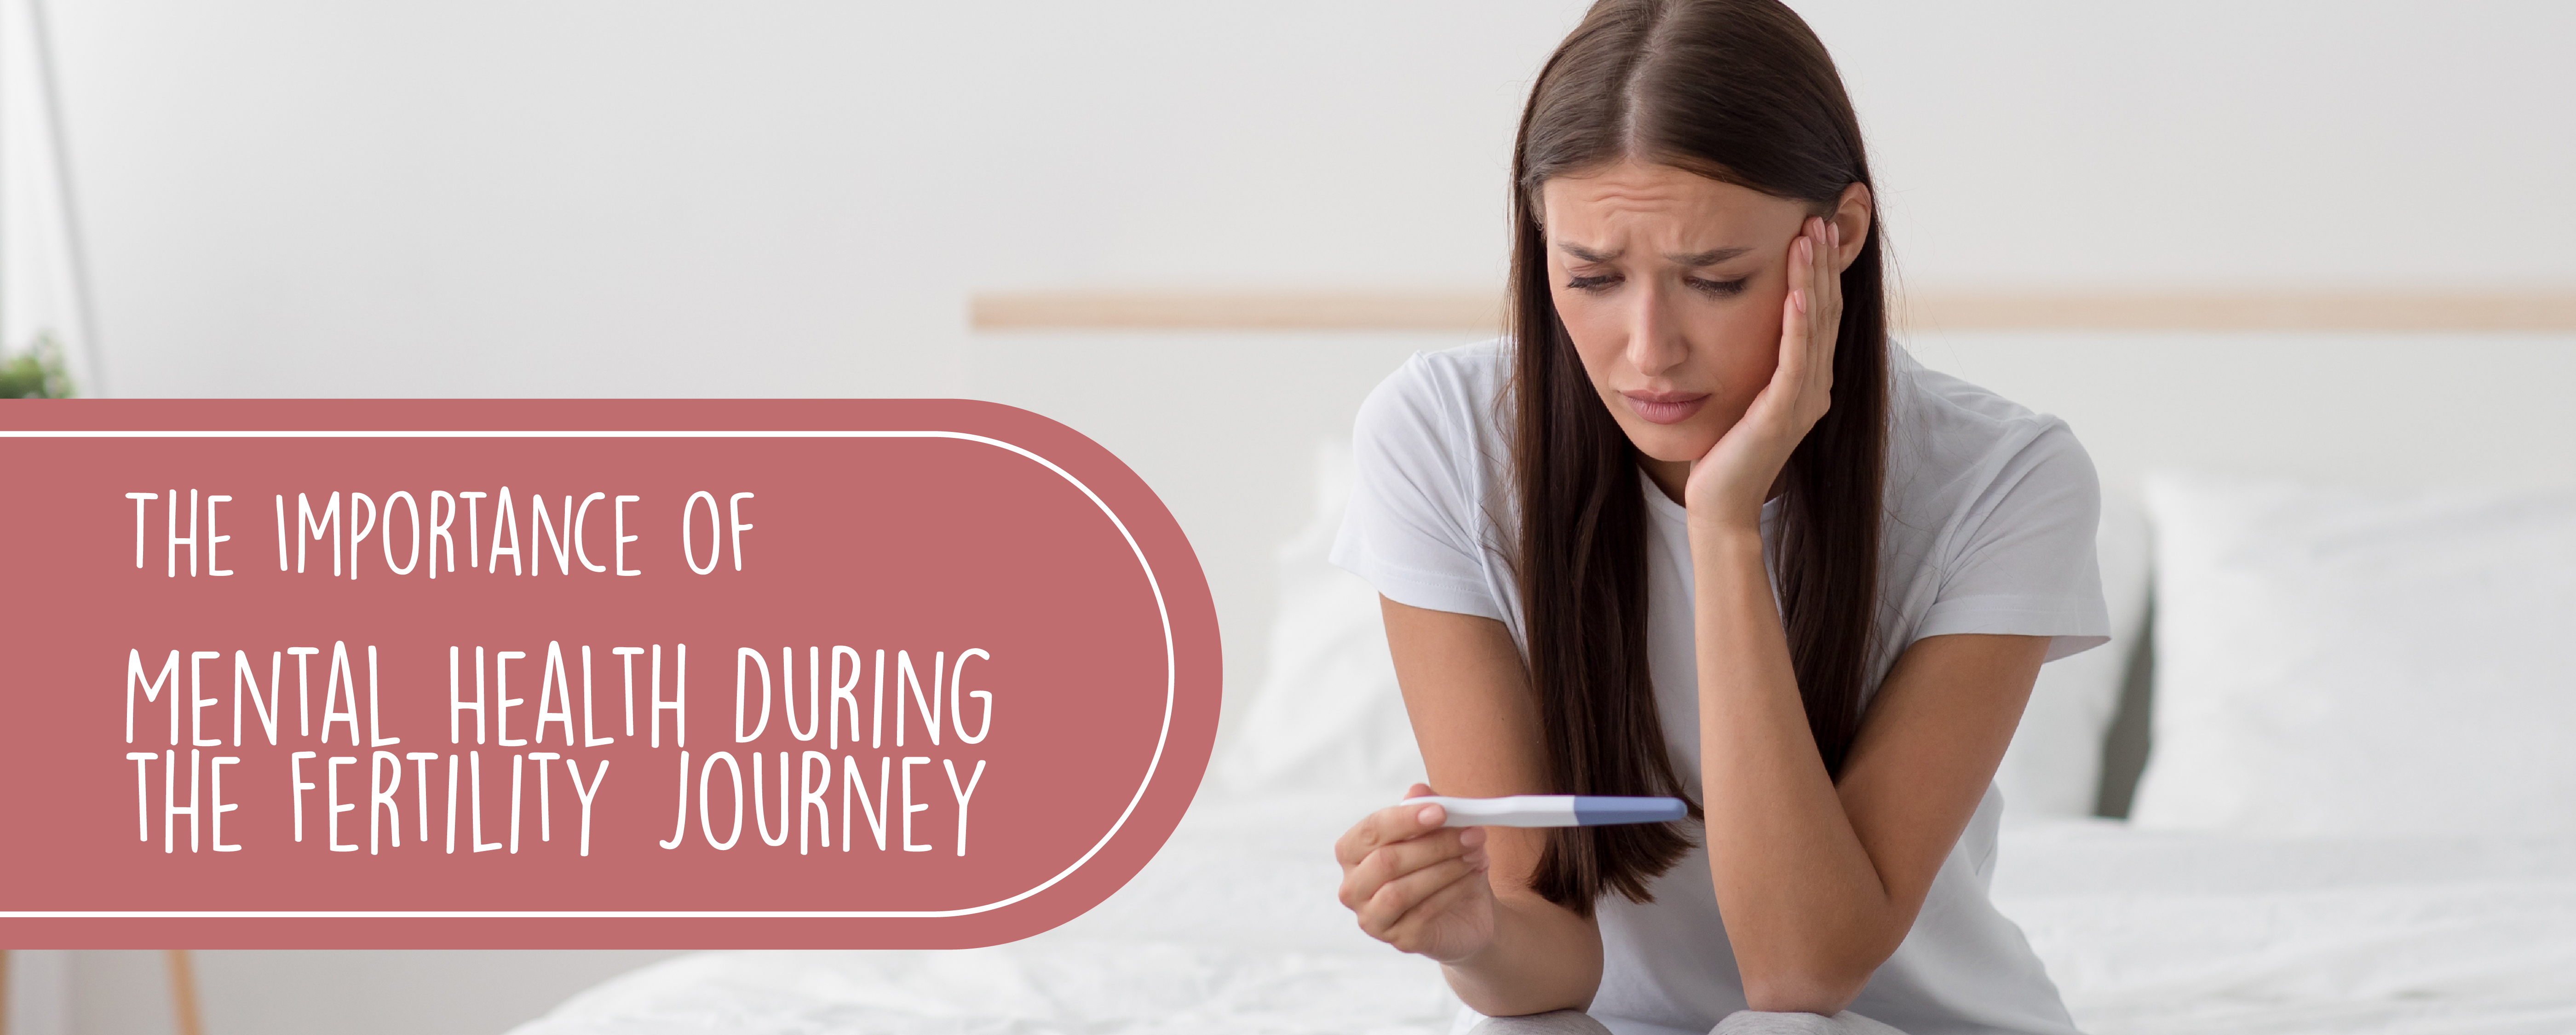 The Importance of Mental Health During the Fertility Journey Header